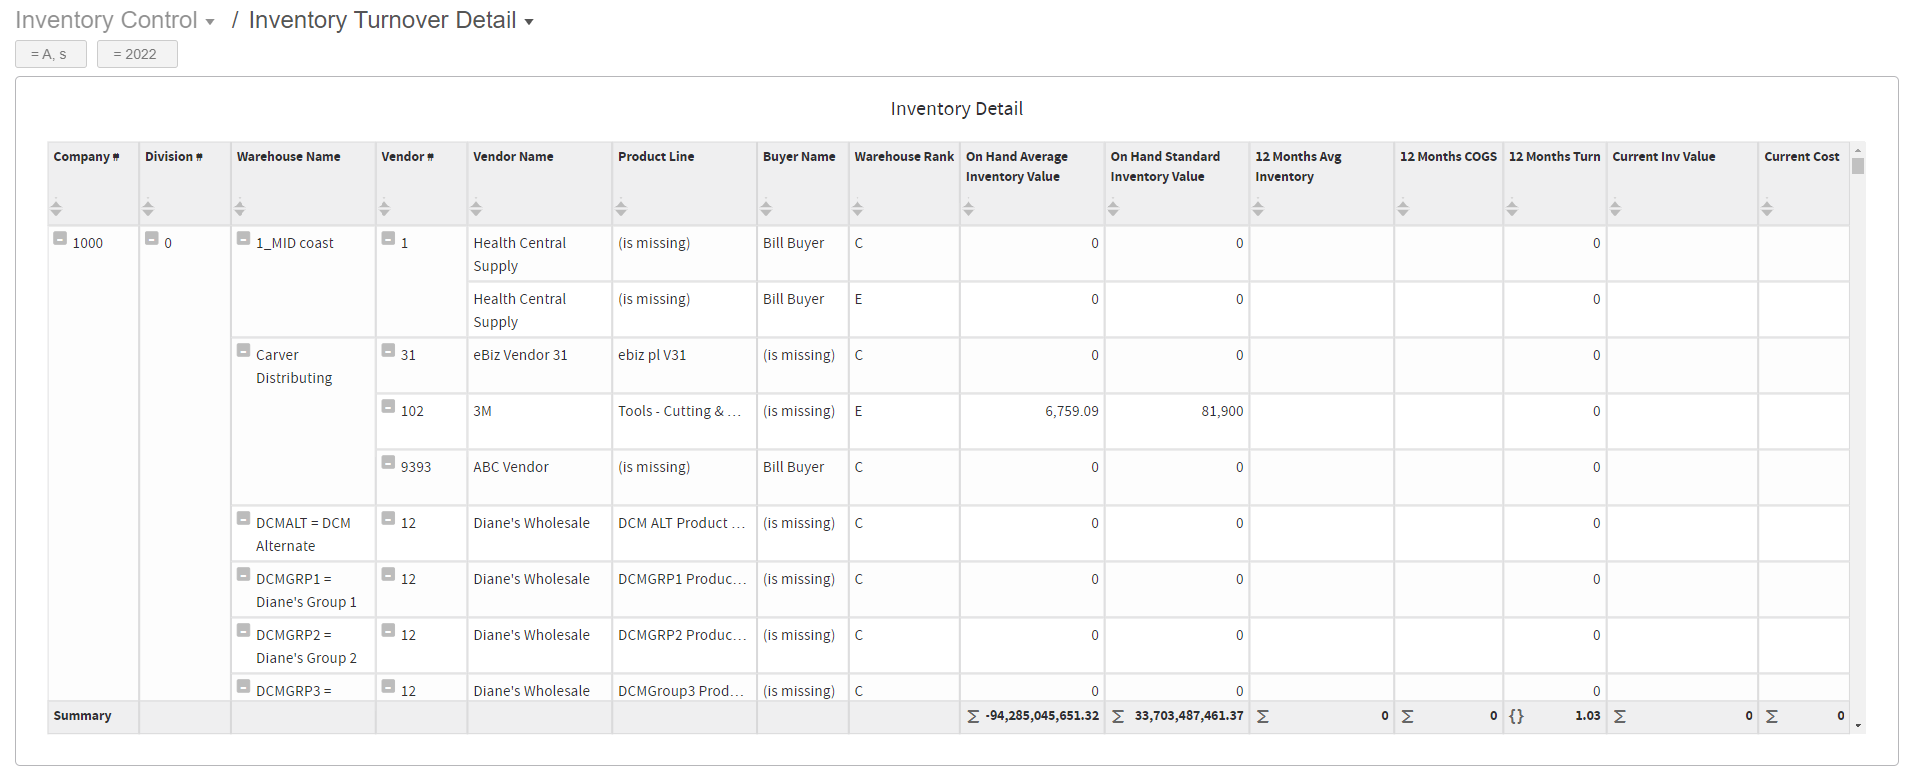 Inventory Turnover Detail dashboard